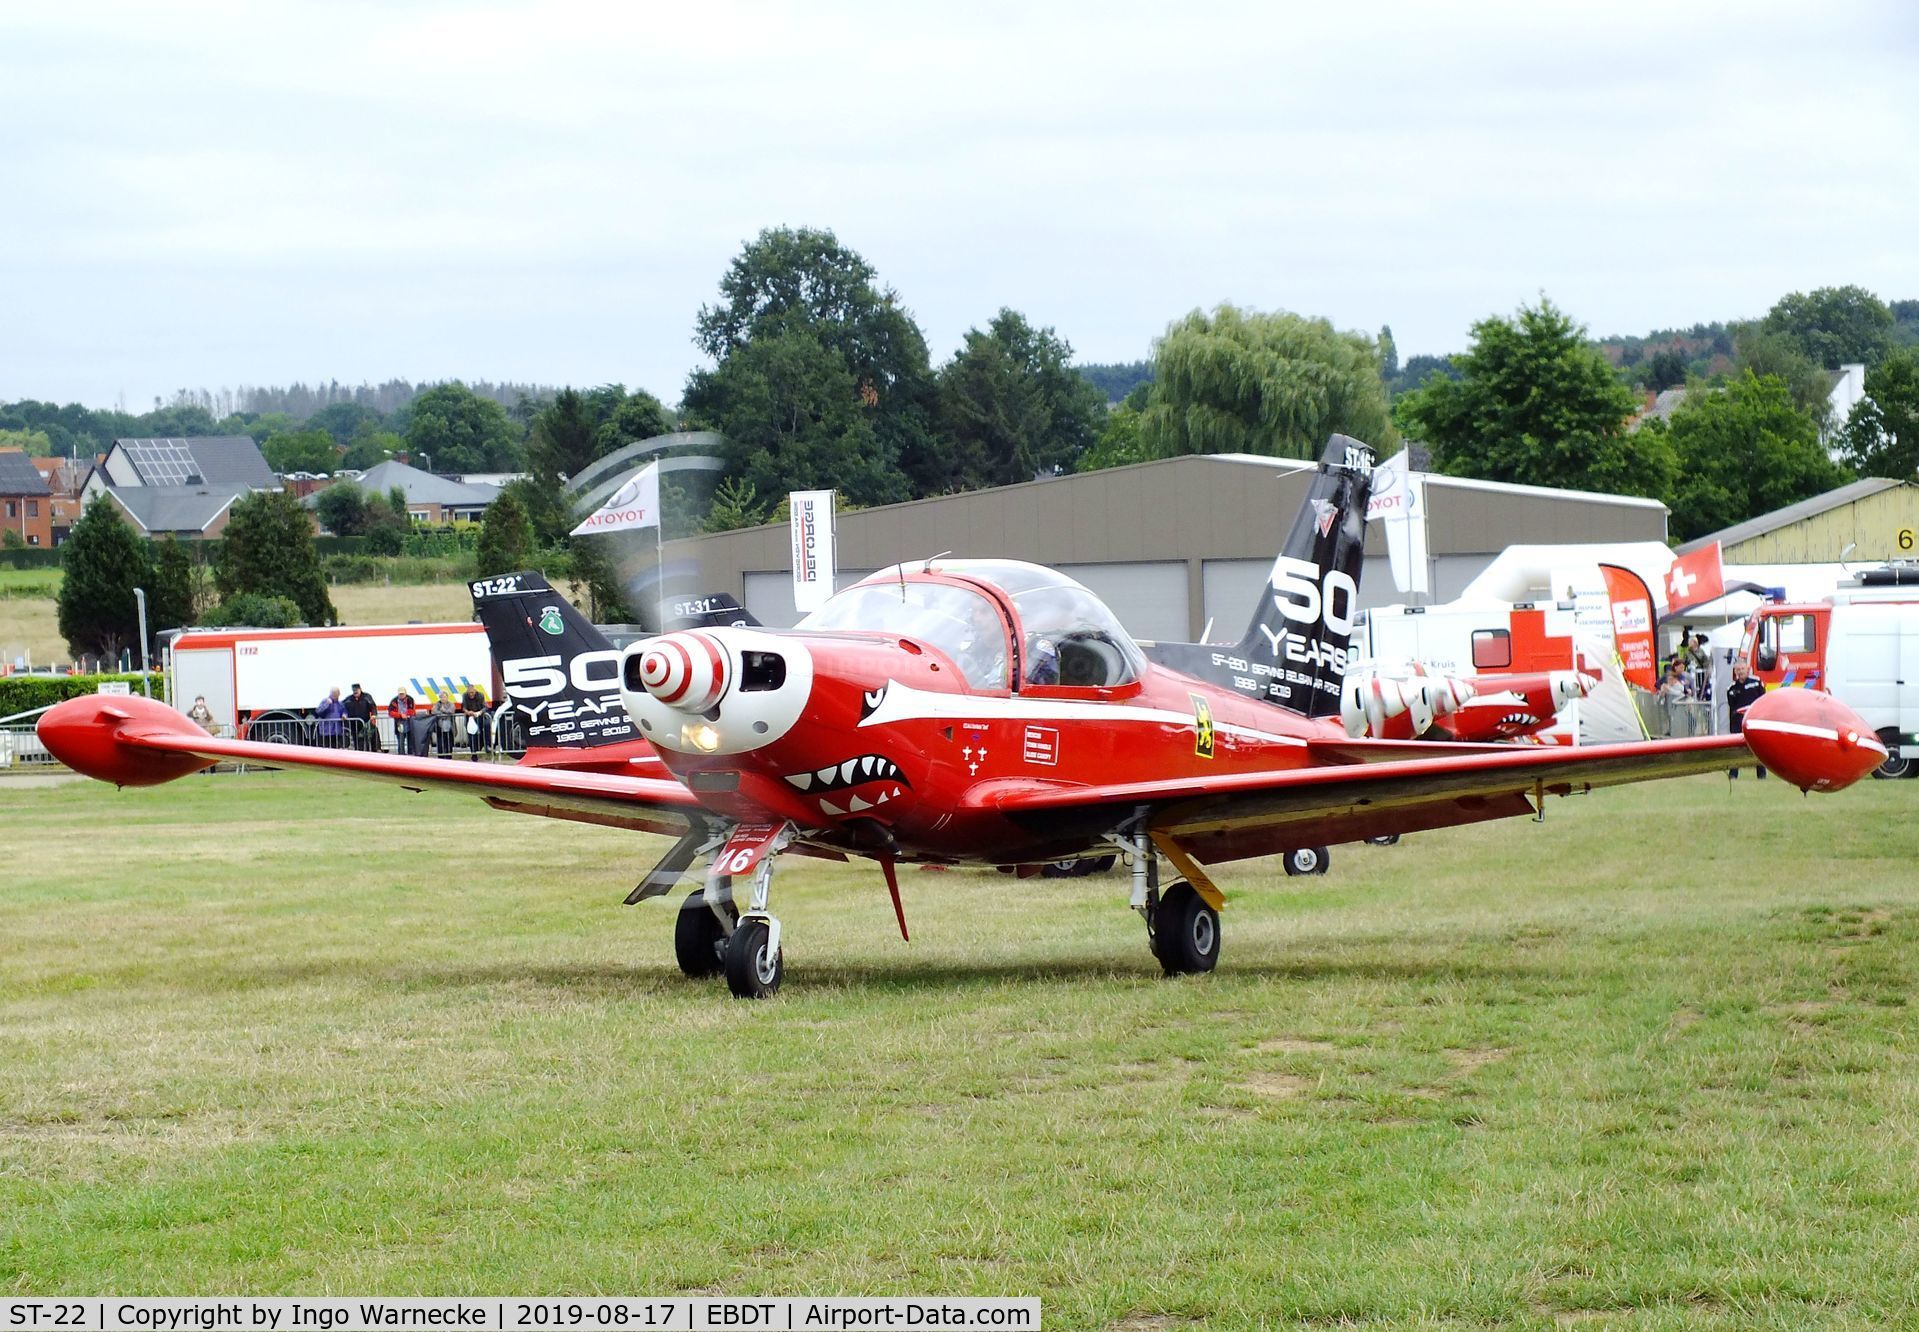 ST-22, SIAI-Marchetti SF-260M C/N 10-22, SIAI-Marchetti SF.260M of the 'Diables Rouges / Red Devils' Belgian Air Force Aerobatic Team at the 2019 Fly-in at Diest/Schaffen airfield